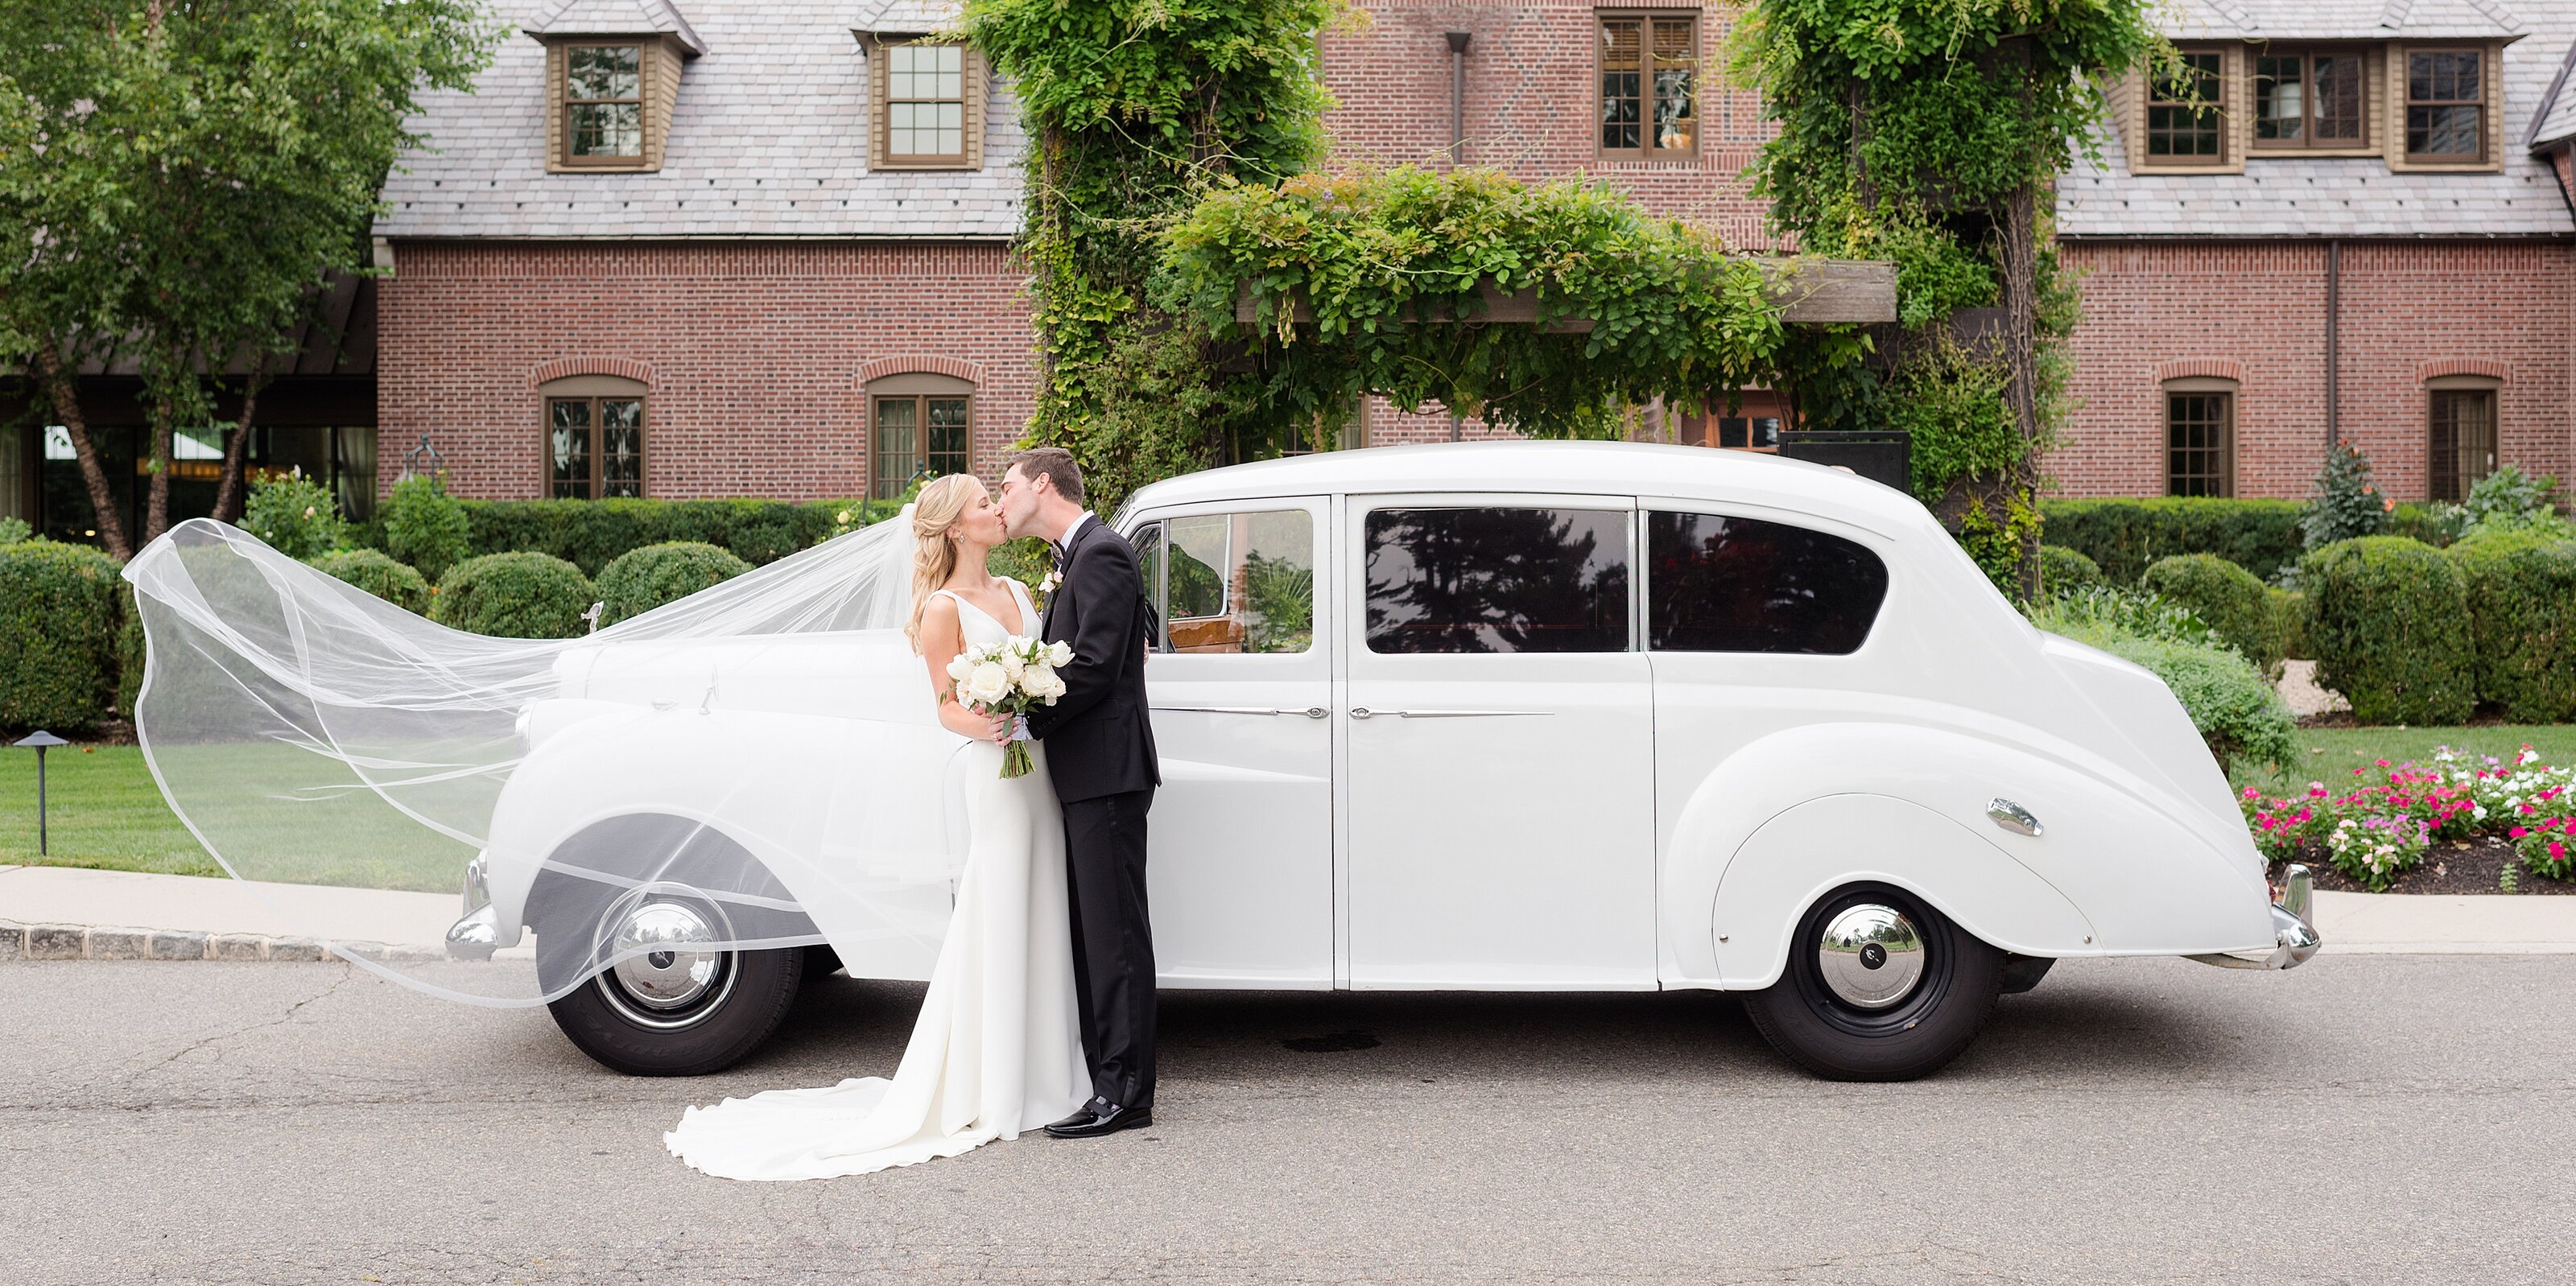 4_bride-and-groom-kiss-in-front-of-white-vintage-rolls-royce